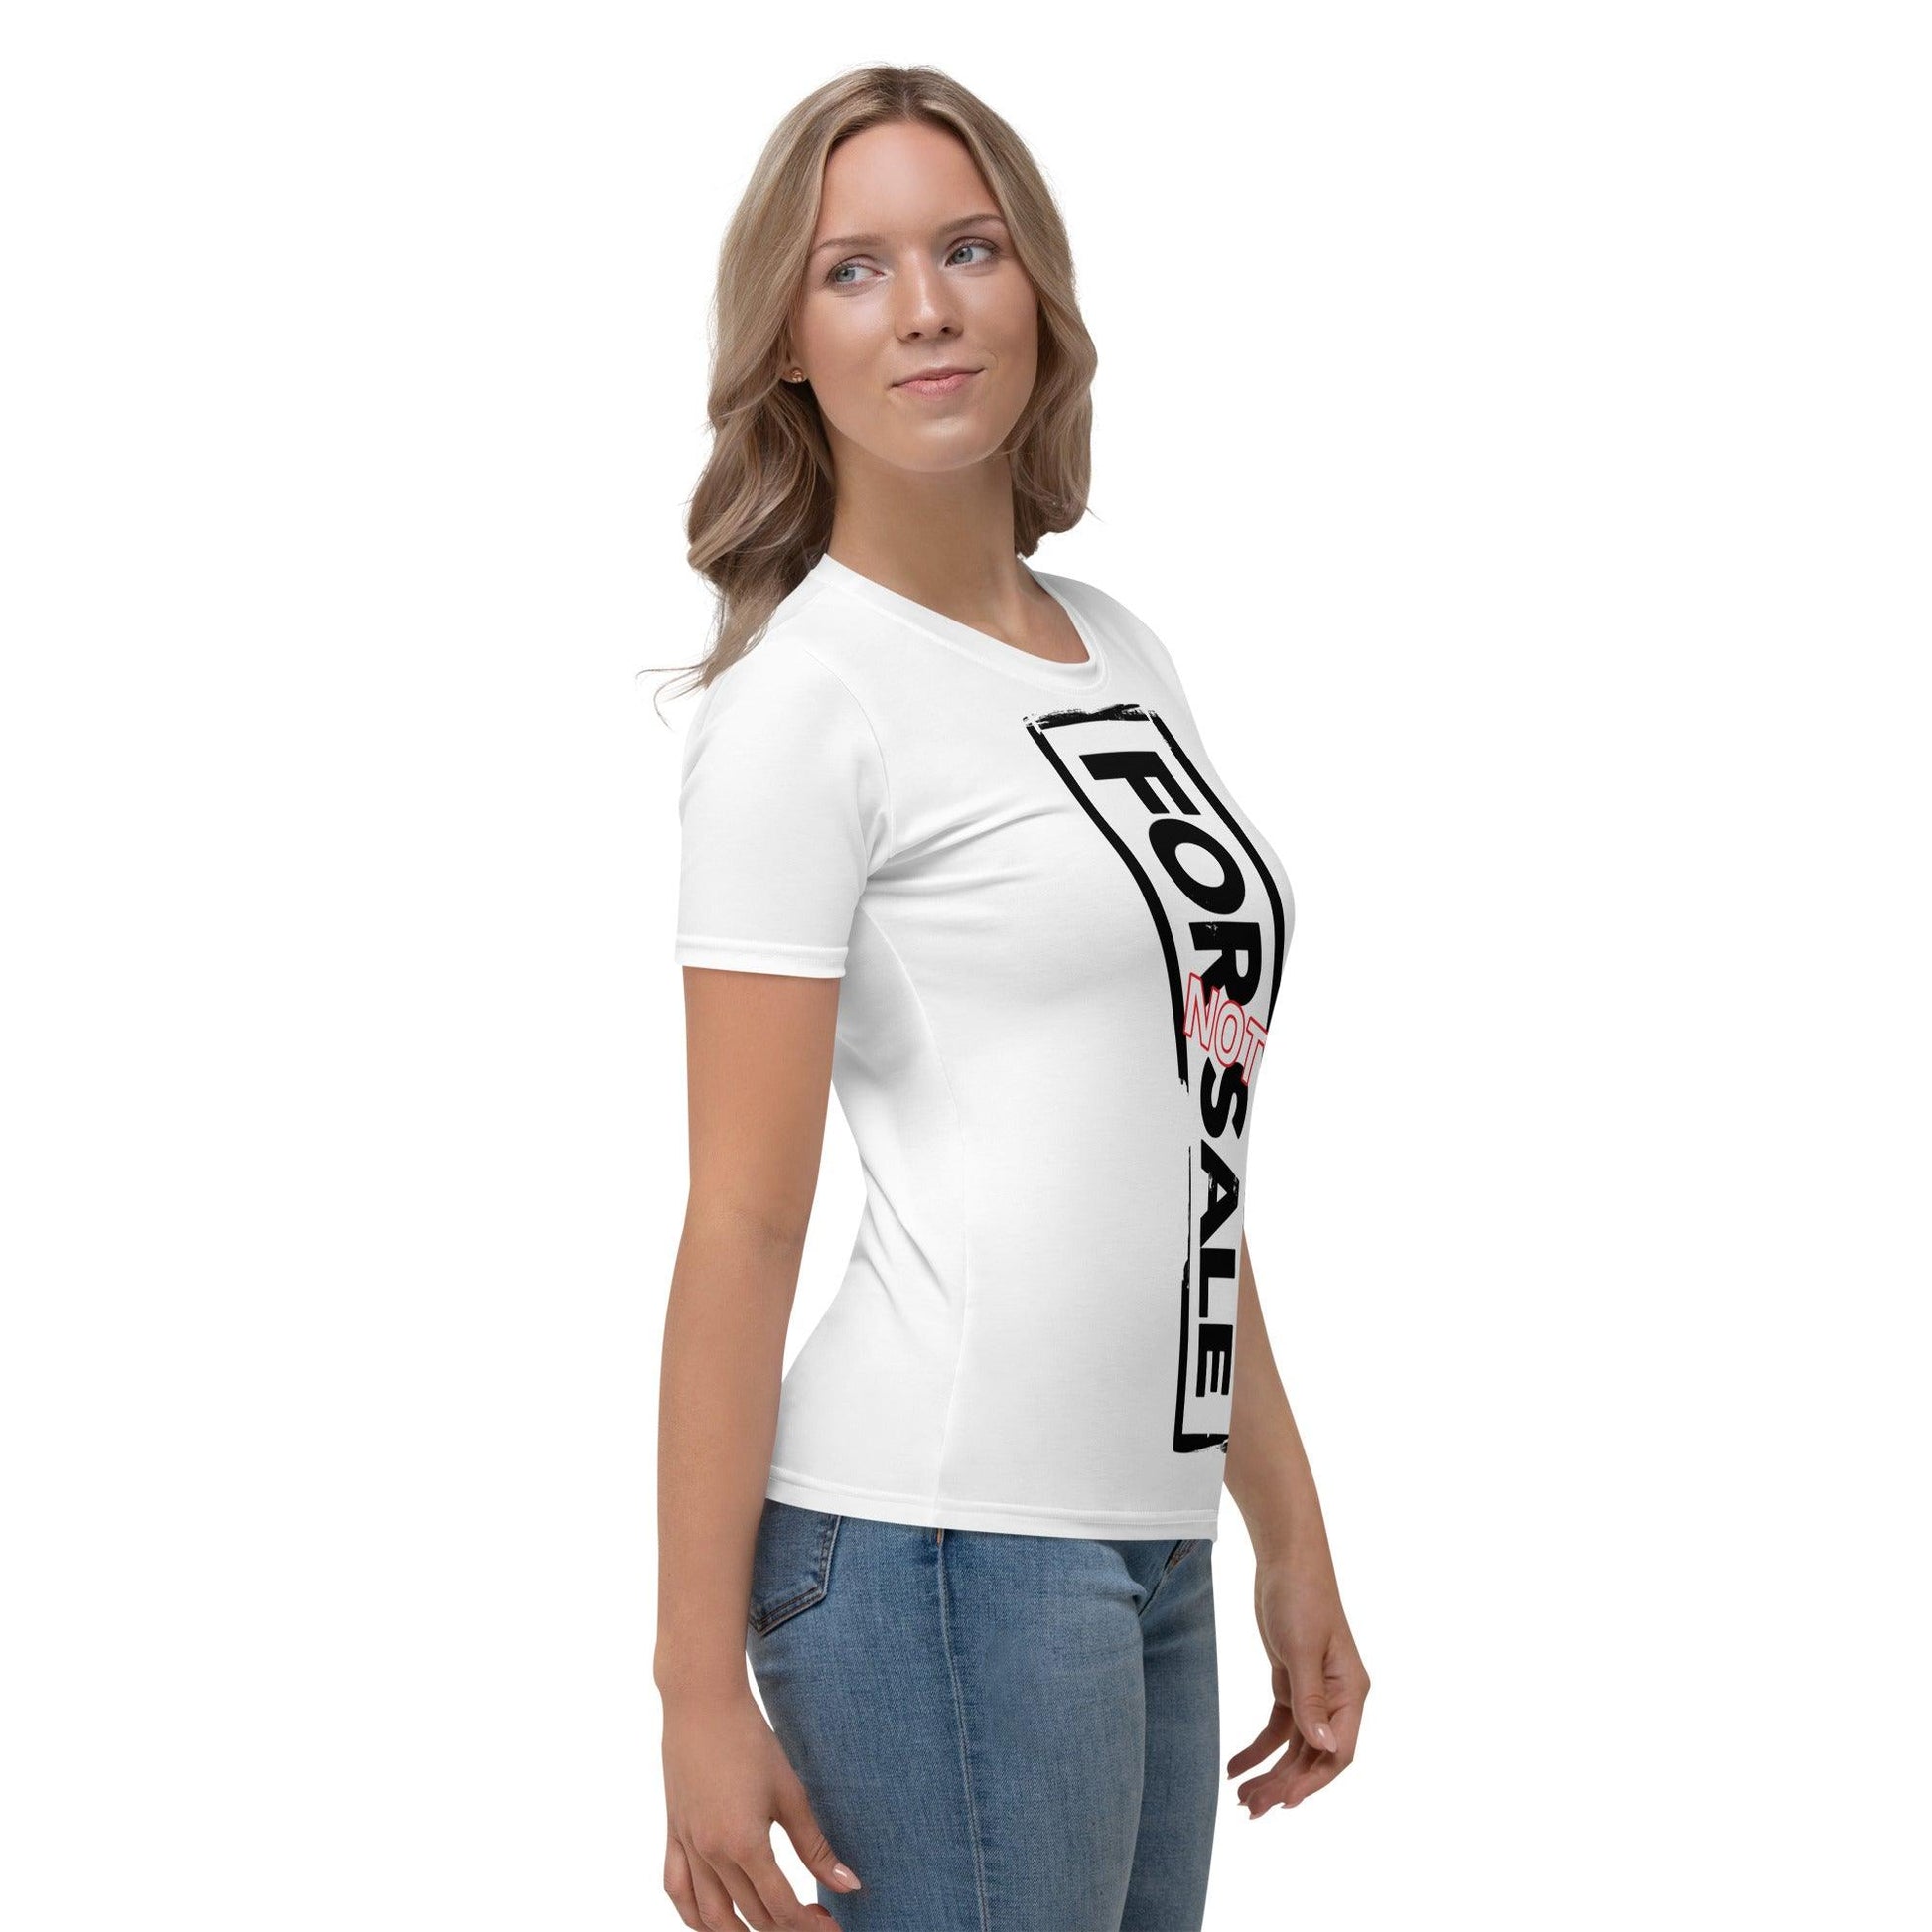 Not For Sale Black Stamp - Womens T-Shirt - iSAW Company